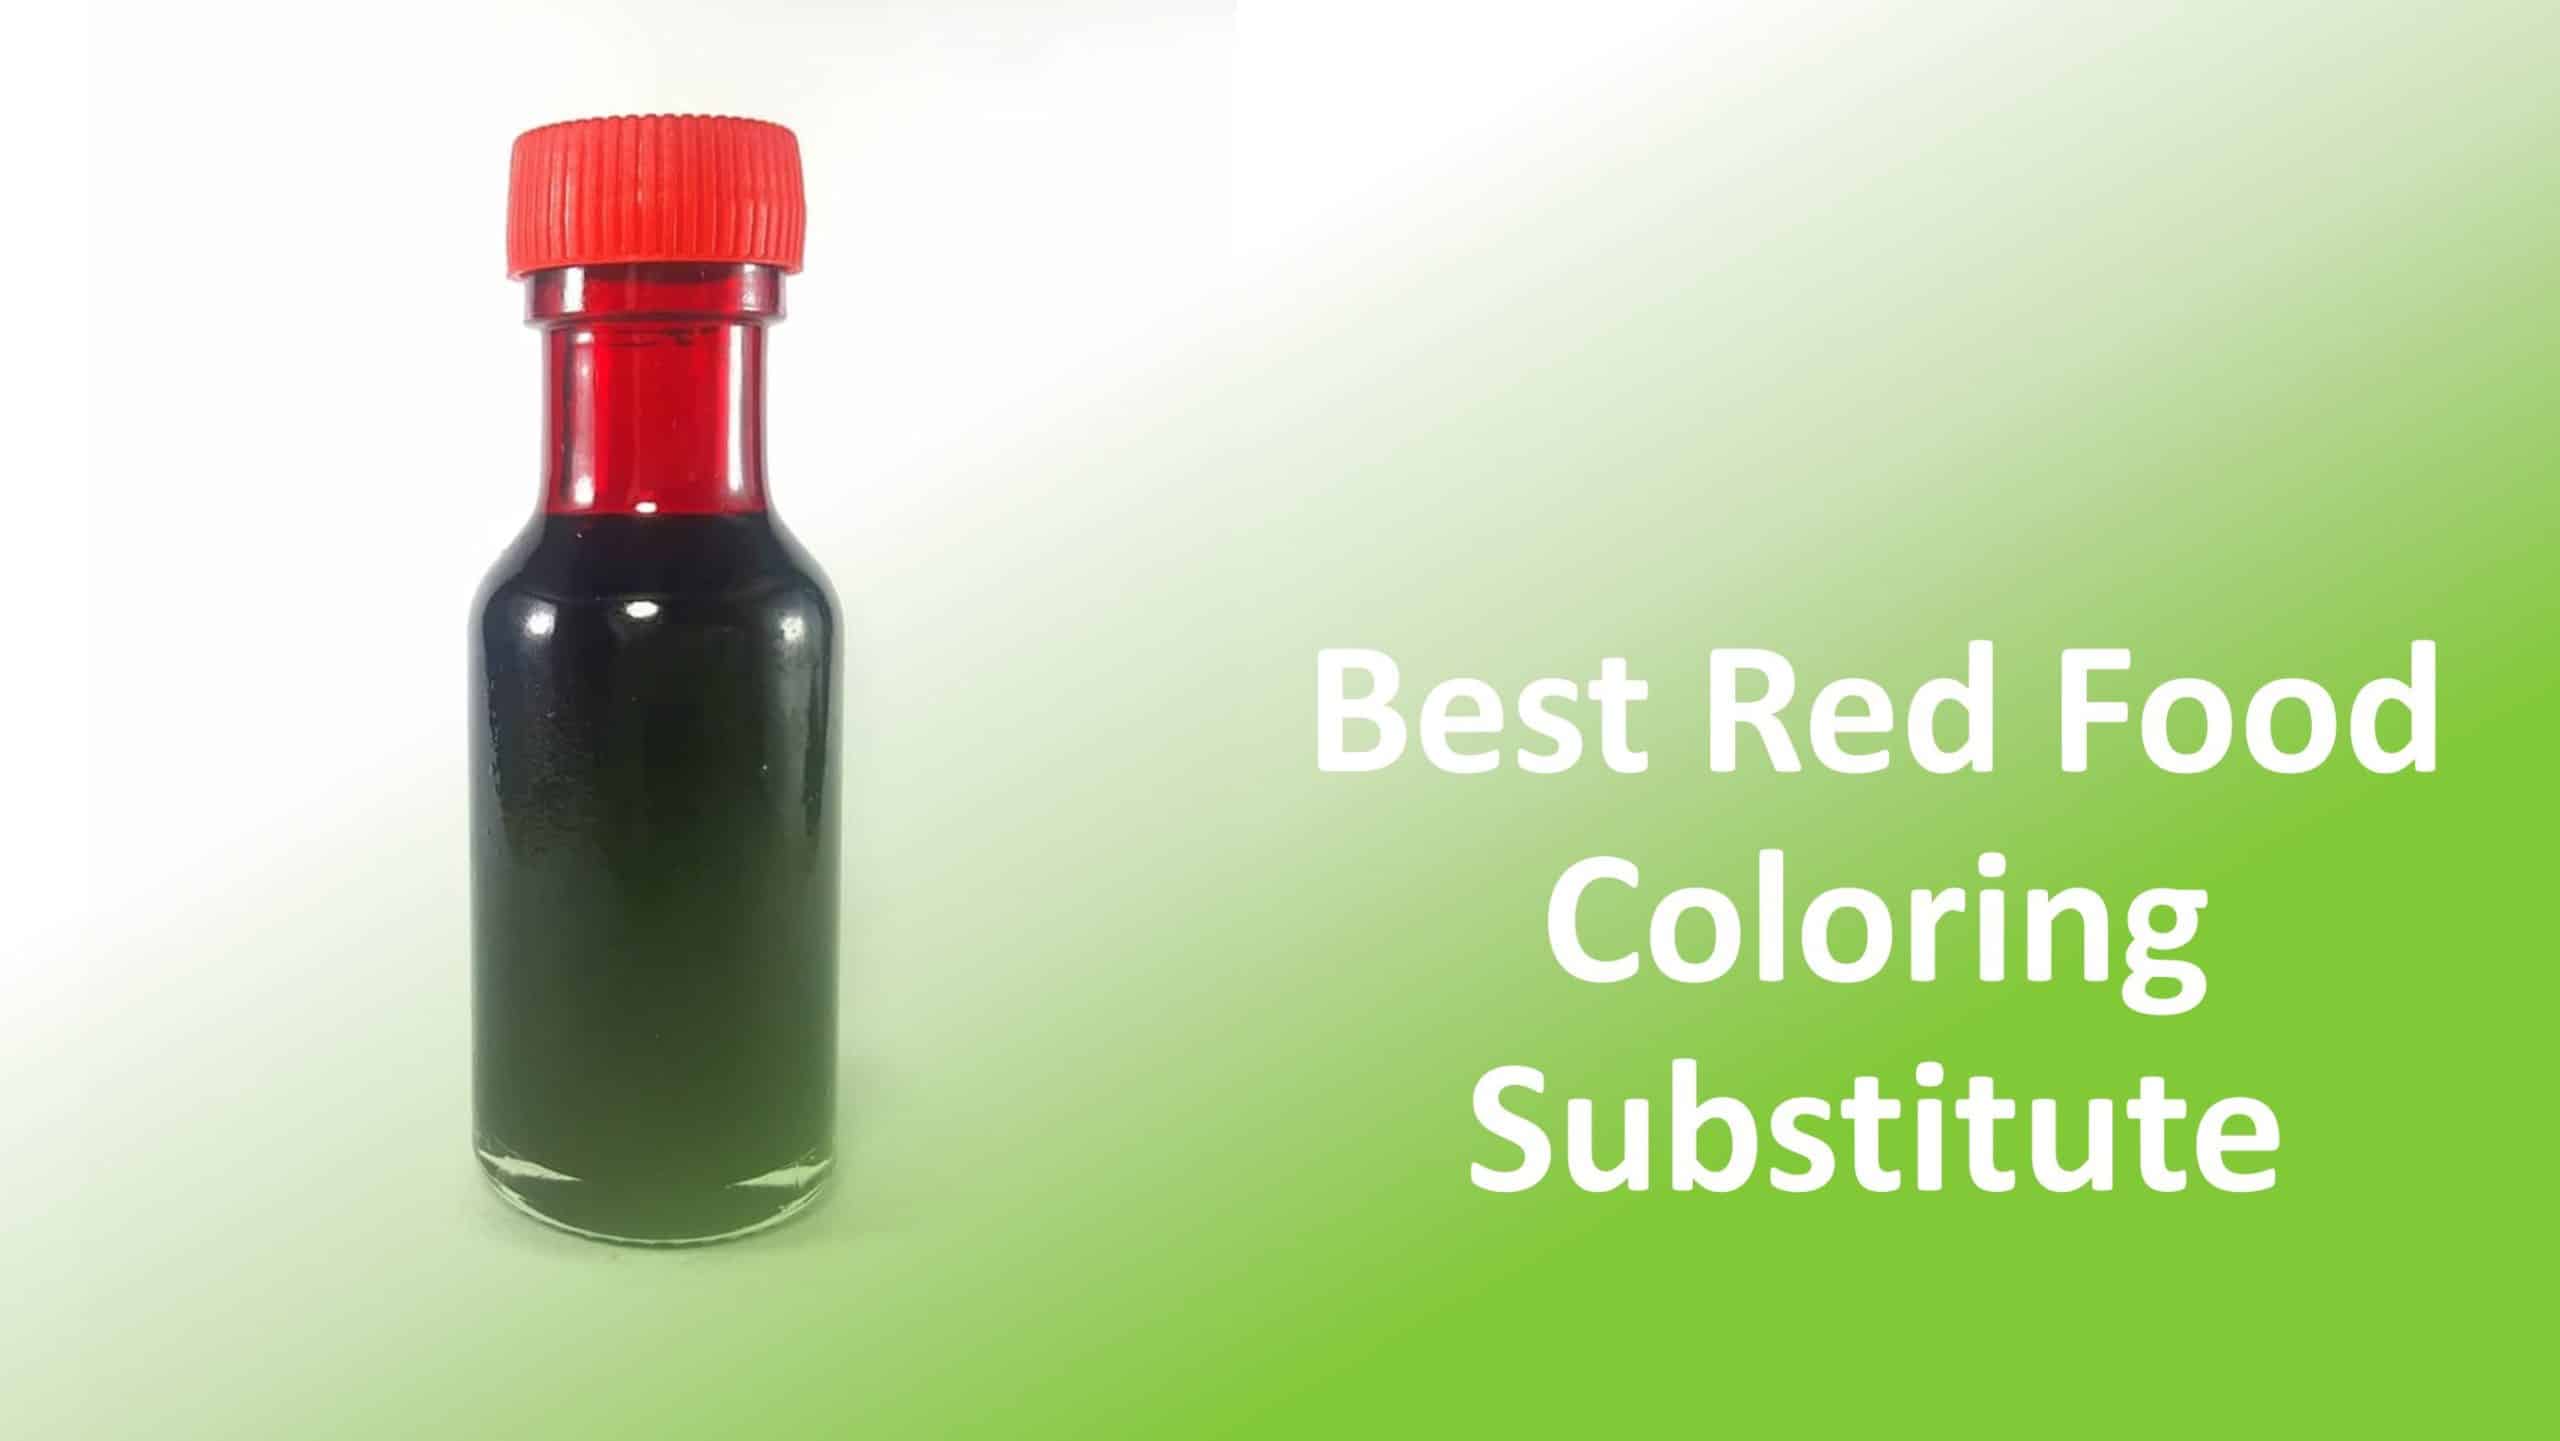 9 Best Red Food Coloring Substitutes